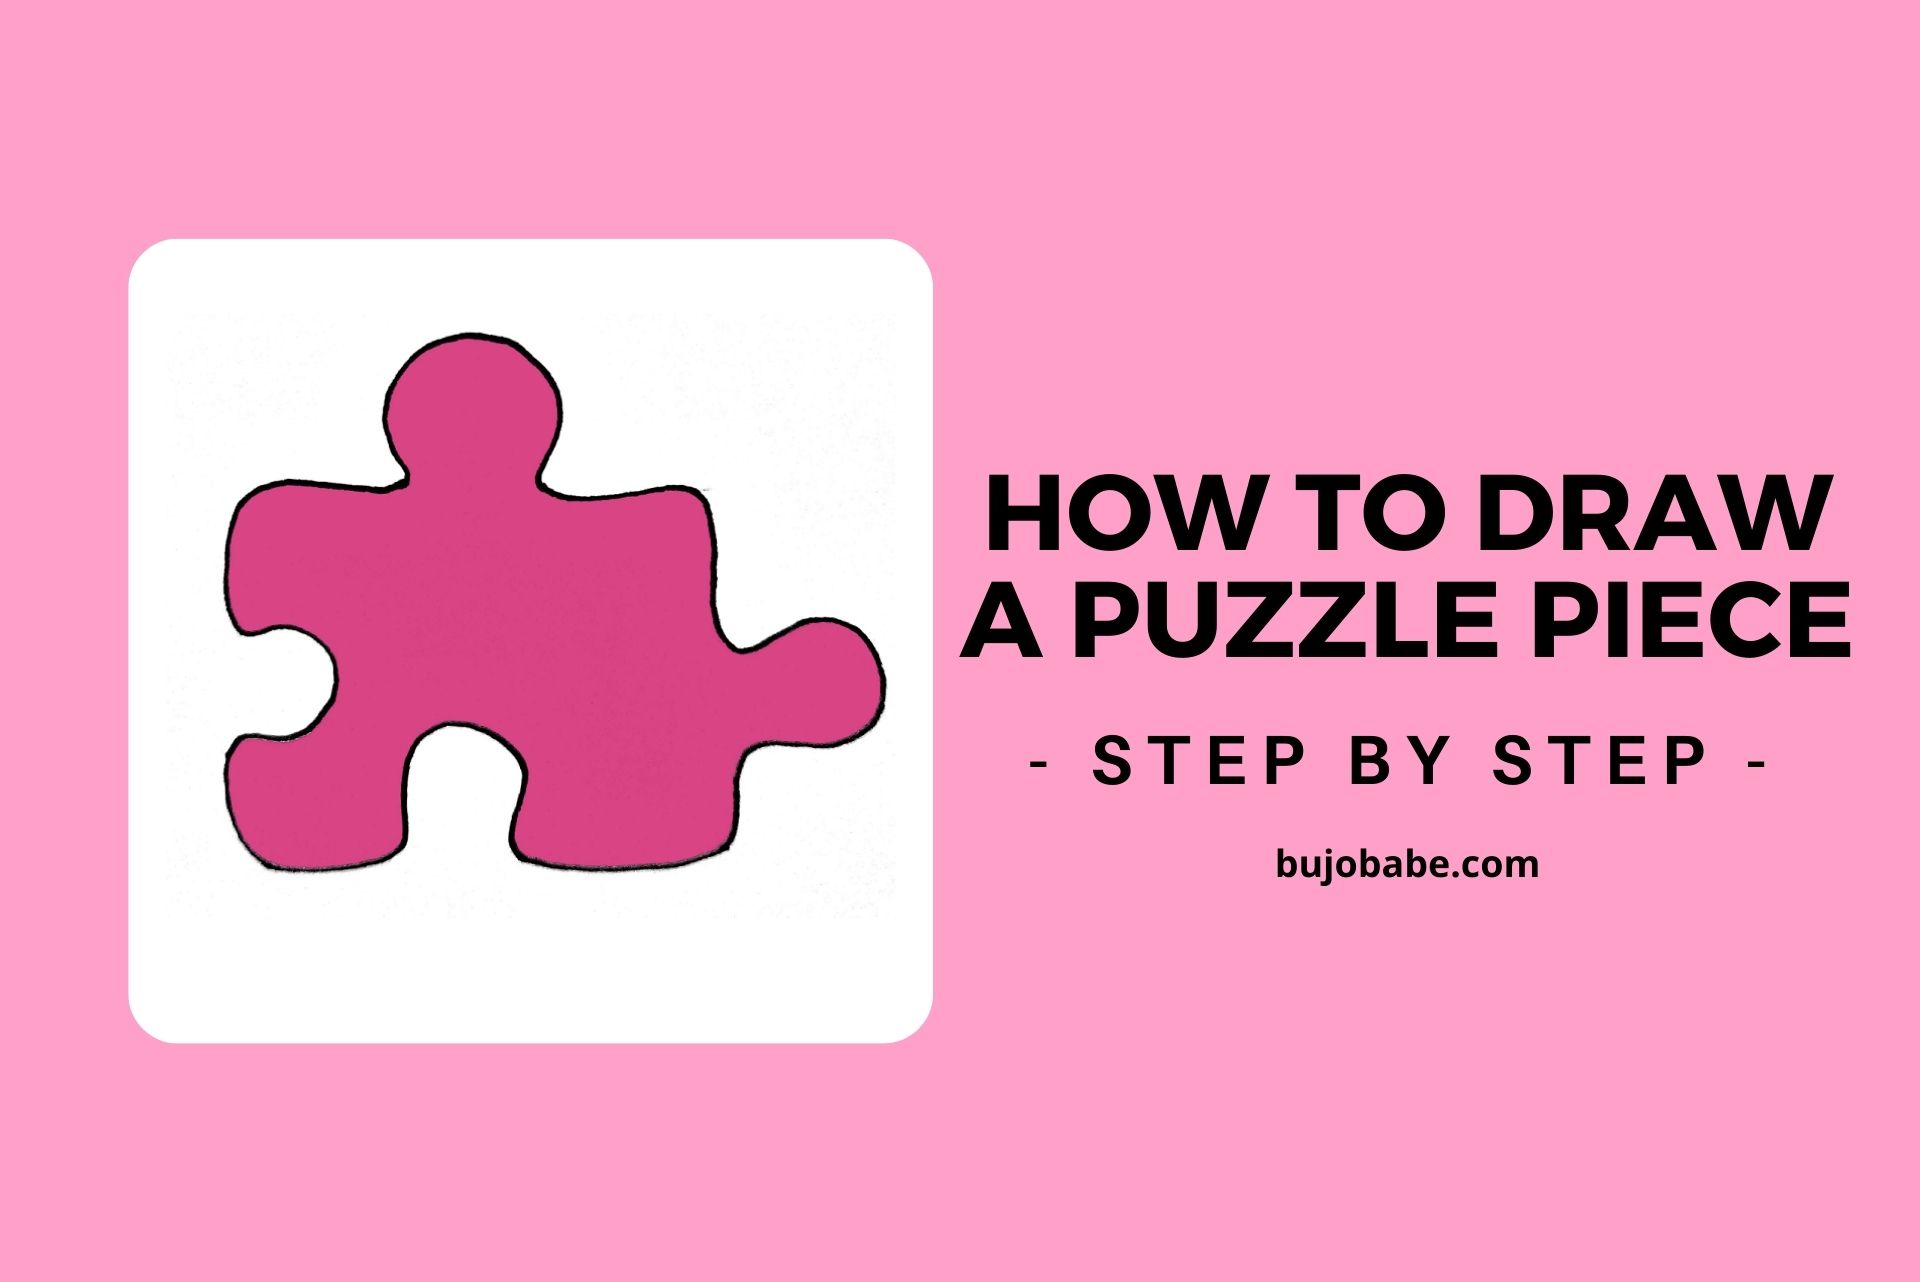 how to draw a puzzle piece step by step